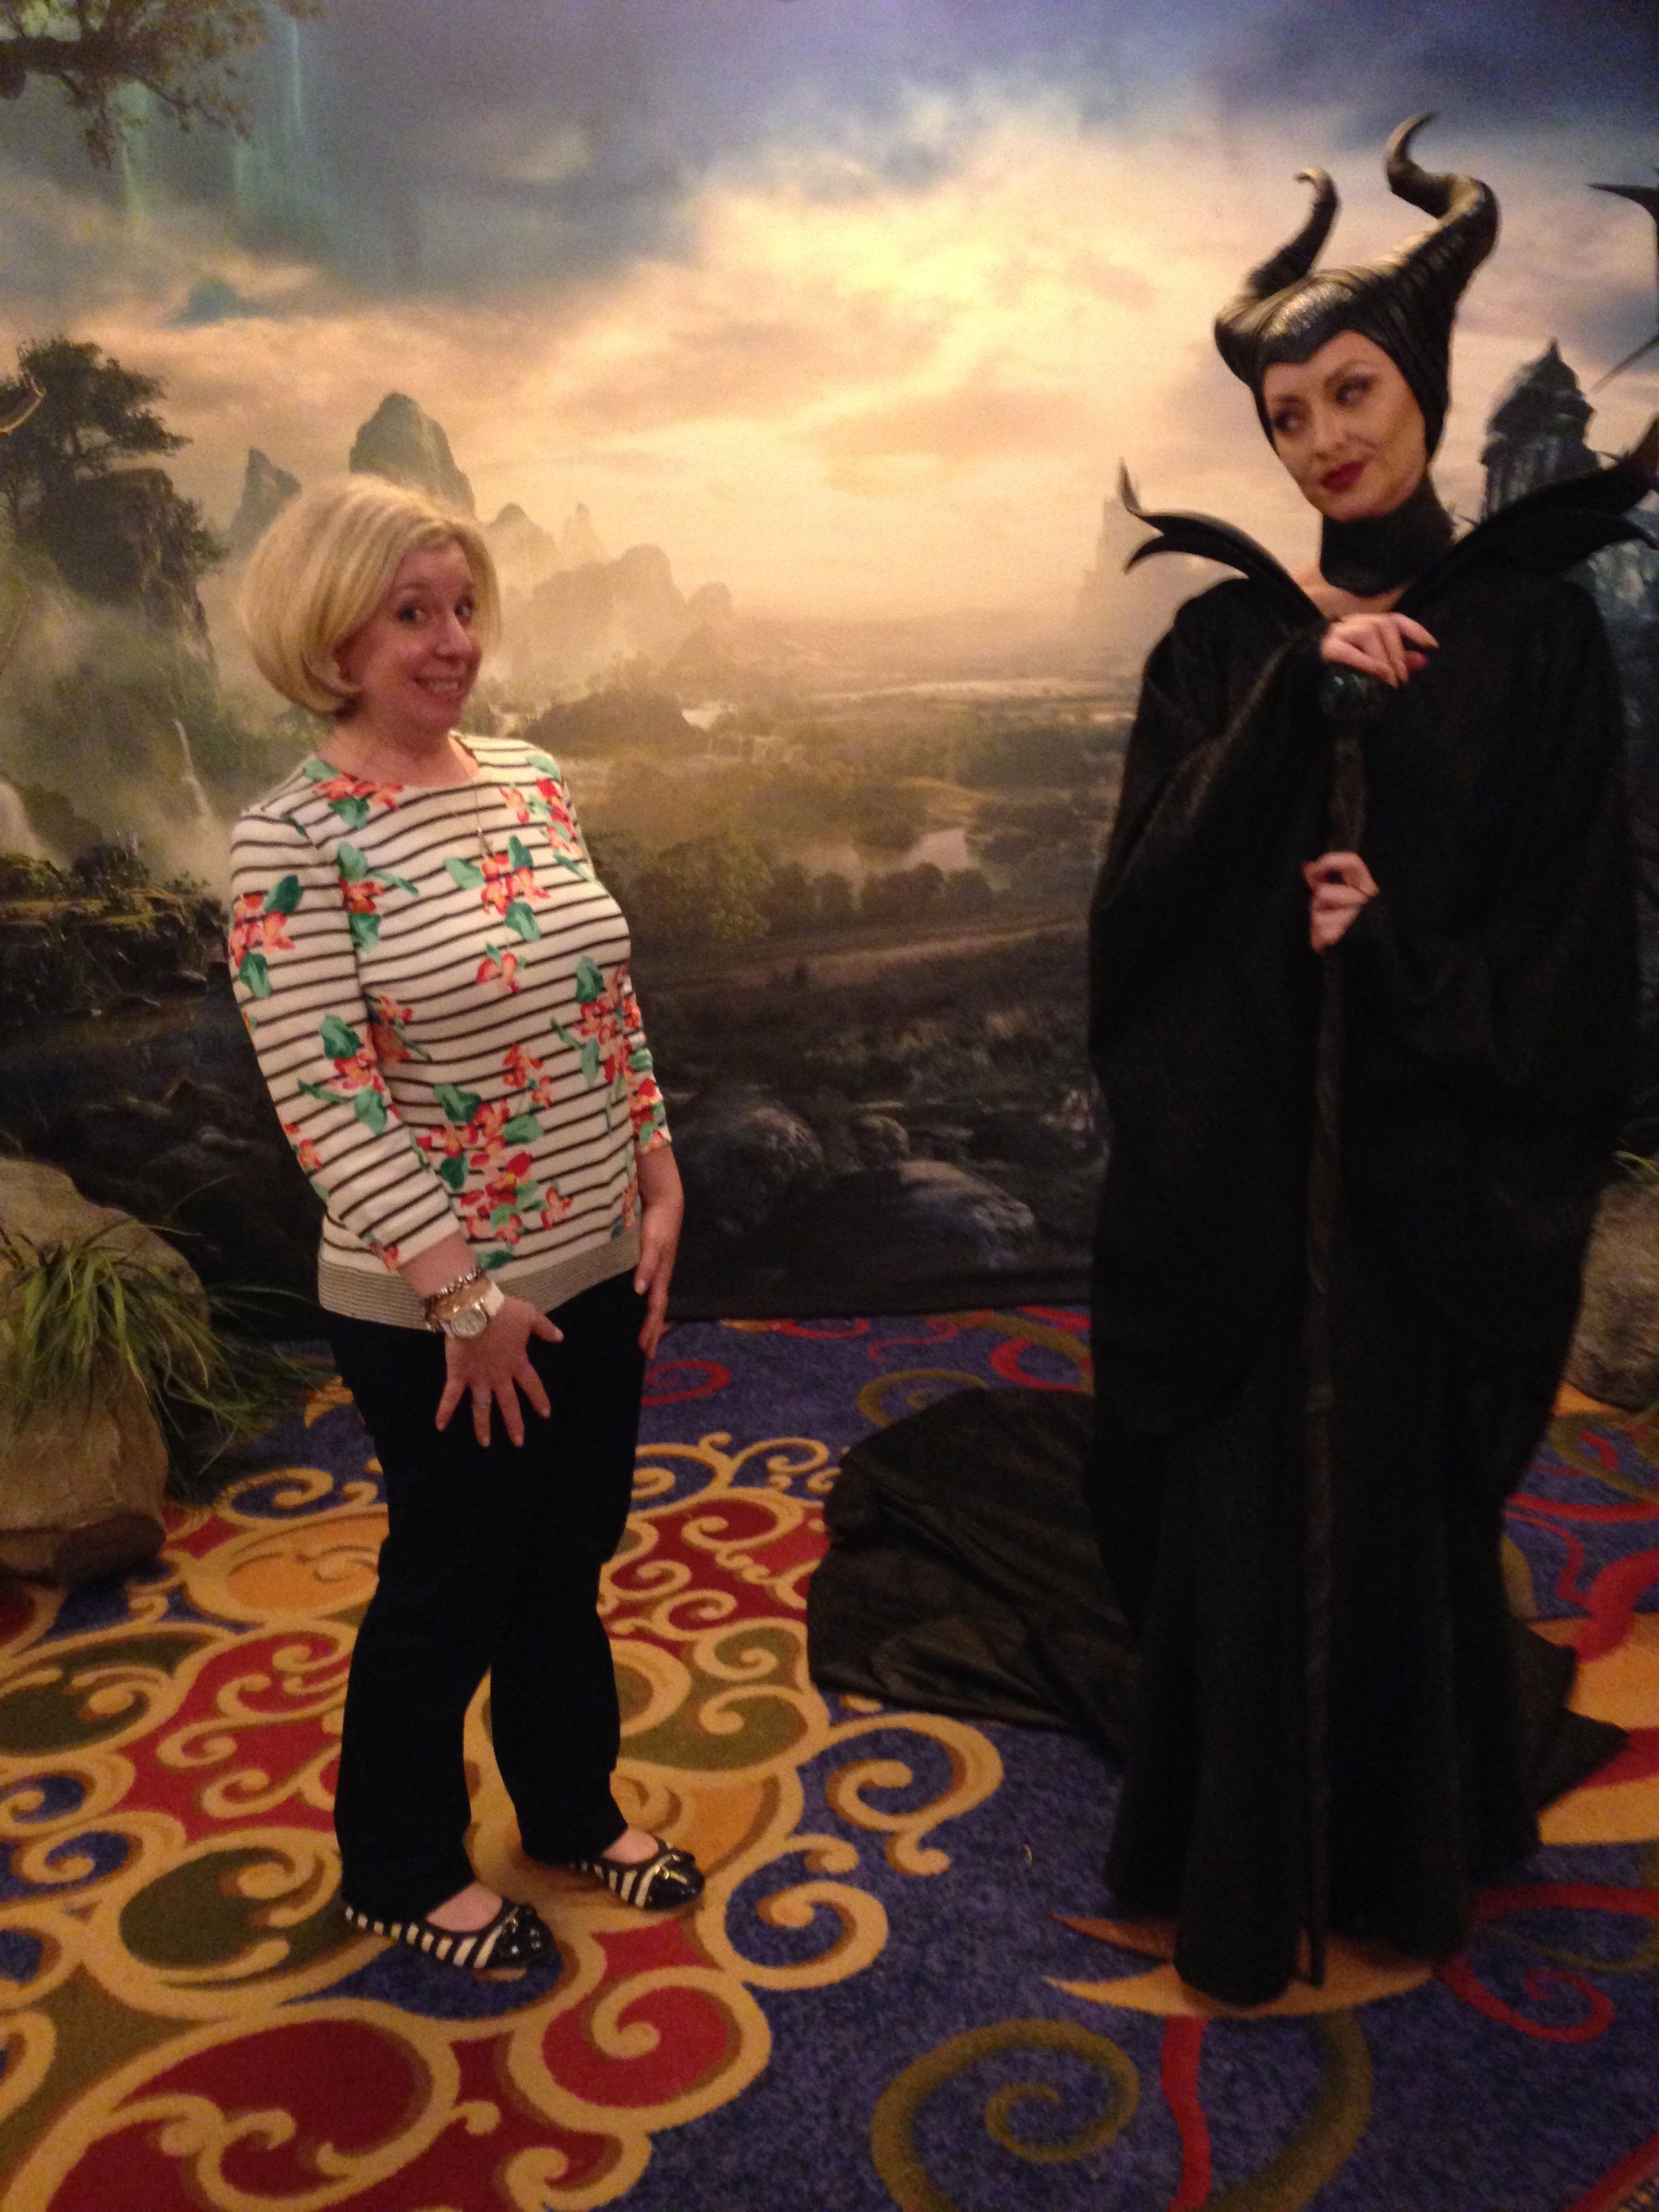 My chance meeting with Maleficent (she was spooky!)